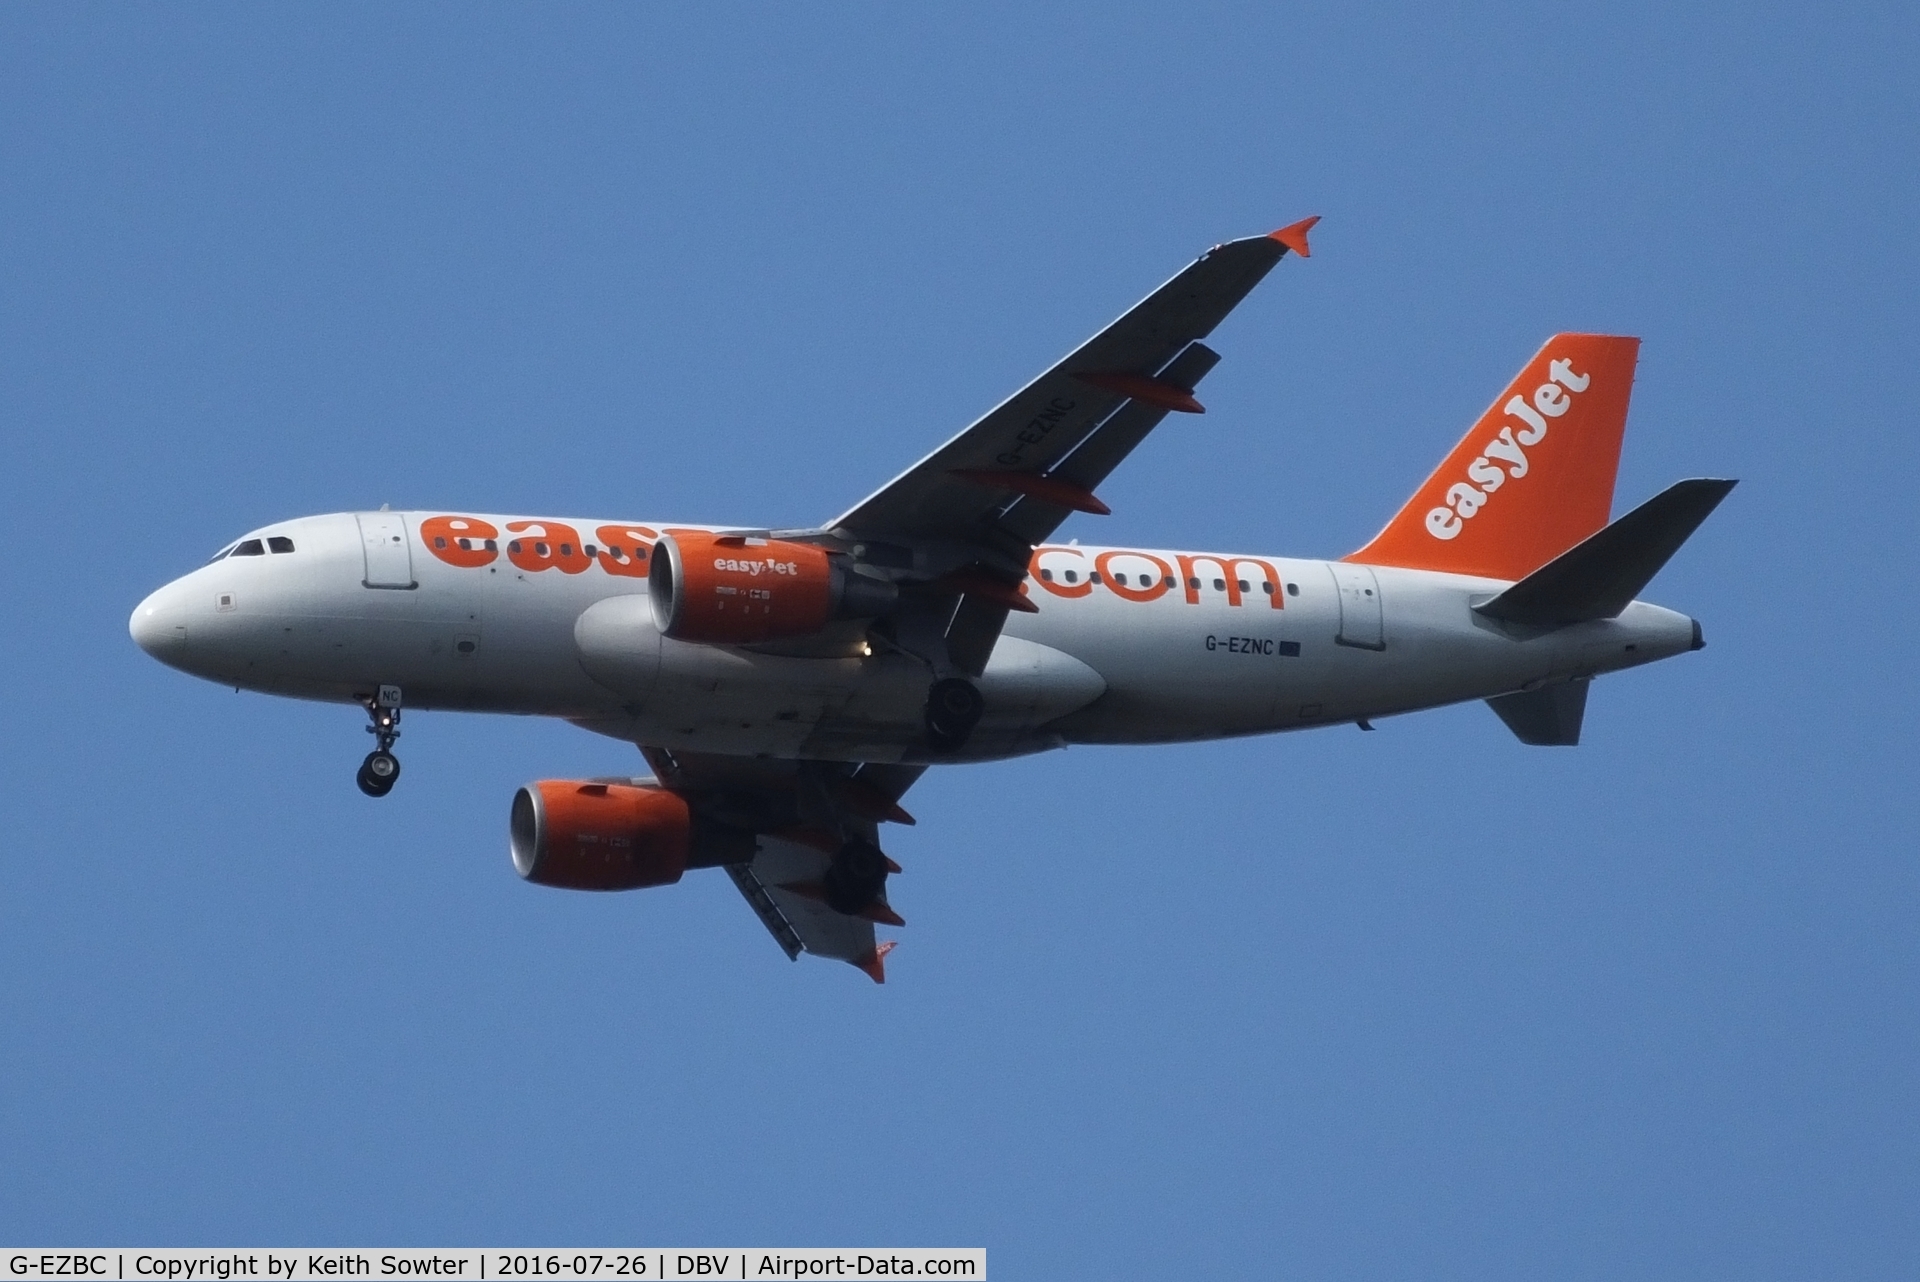 G-EZBC, 2006 Airbus A319-111 C/N 2866, On final approach at Dubrovnik